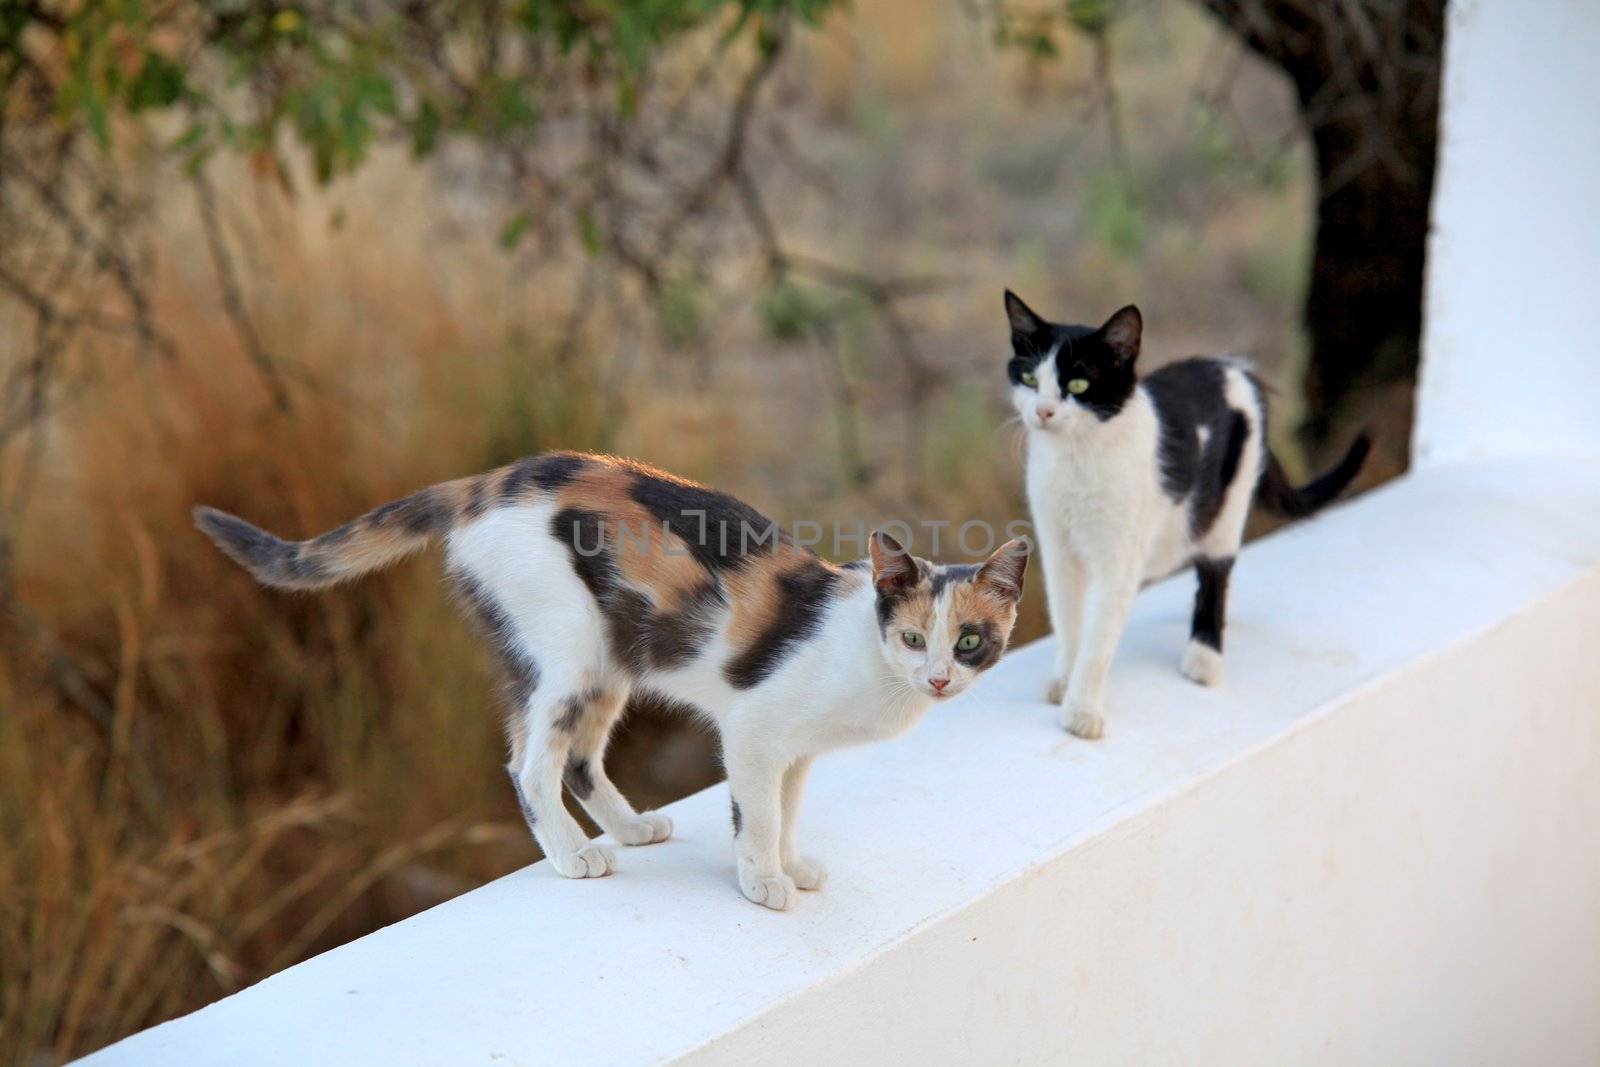 Greek cats on wall with focus on first cat 